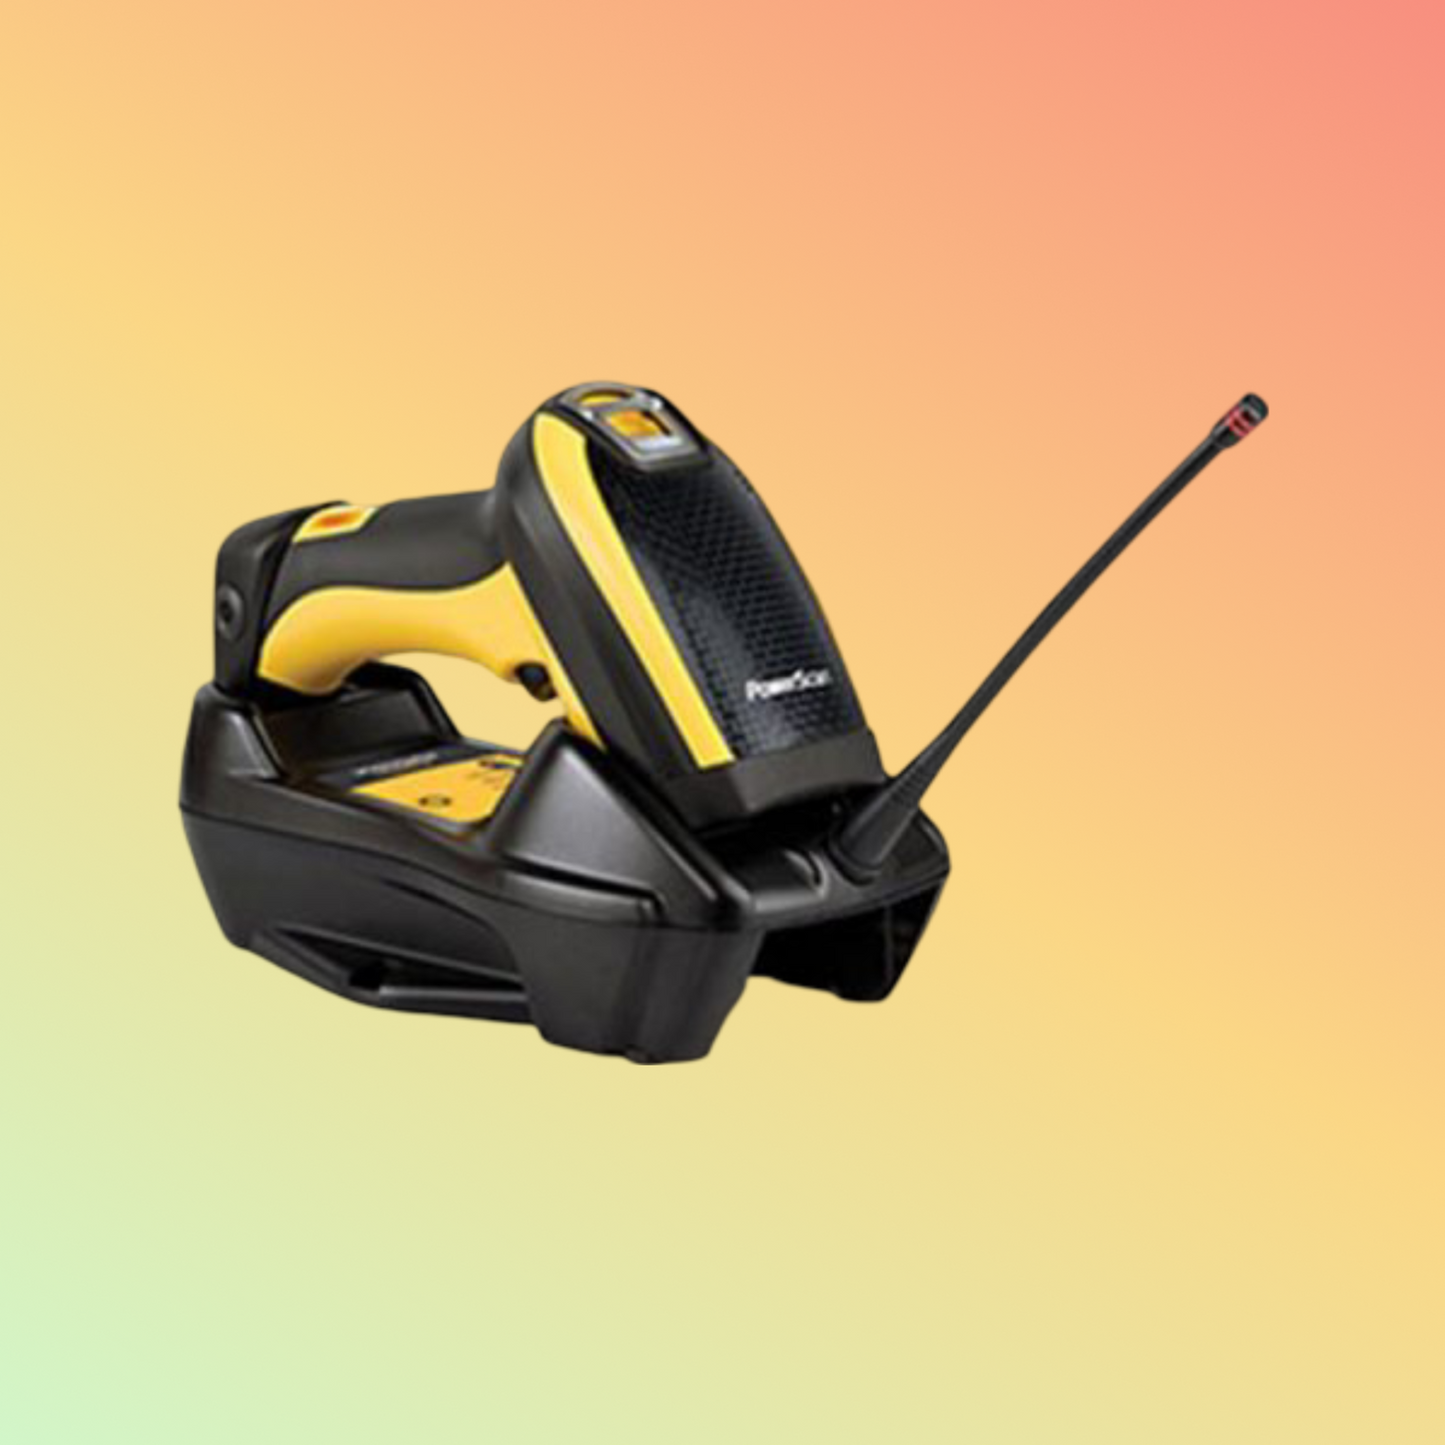 DCI Scanner PM9500 (DPM) Mobile Barcode Scanner